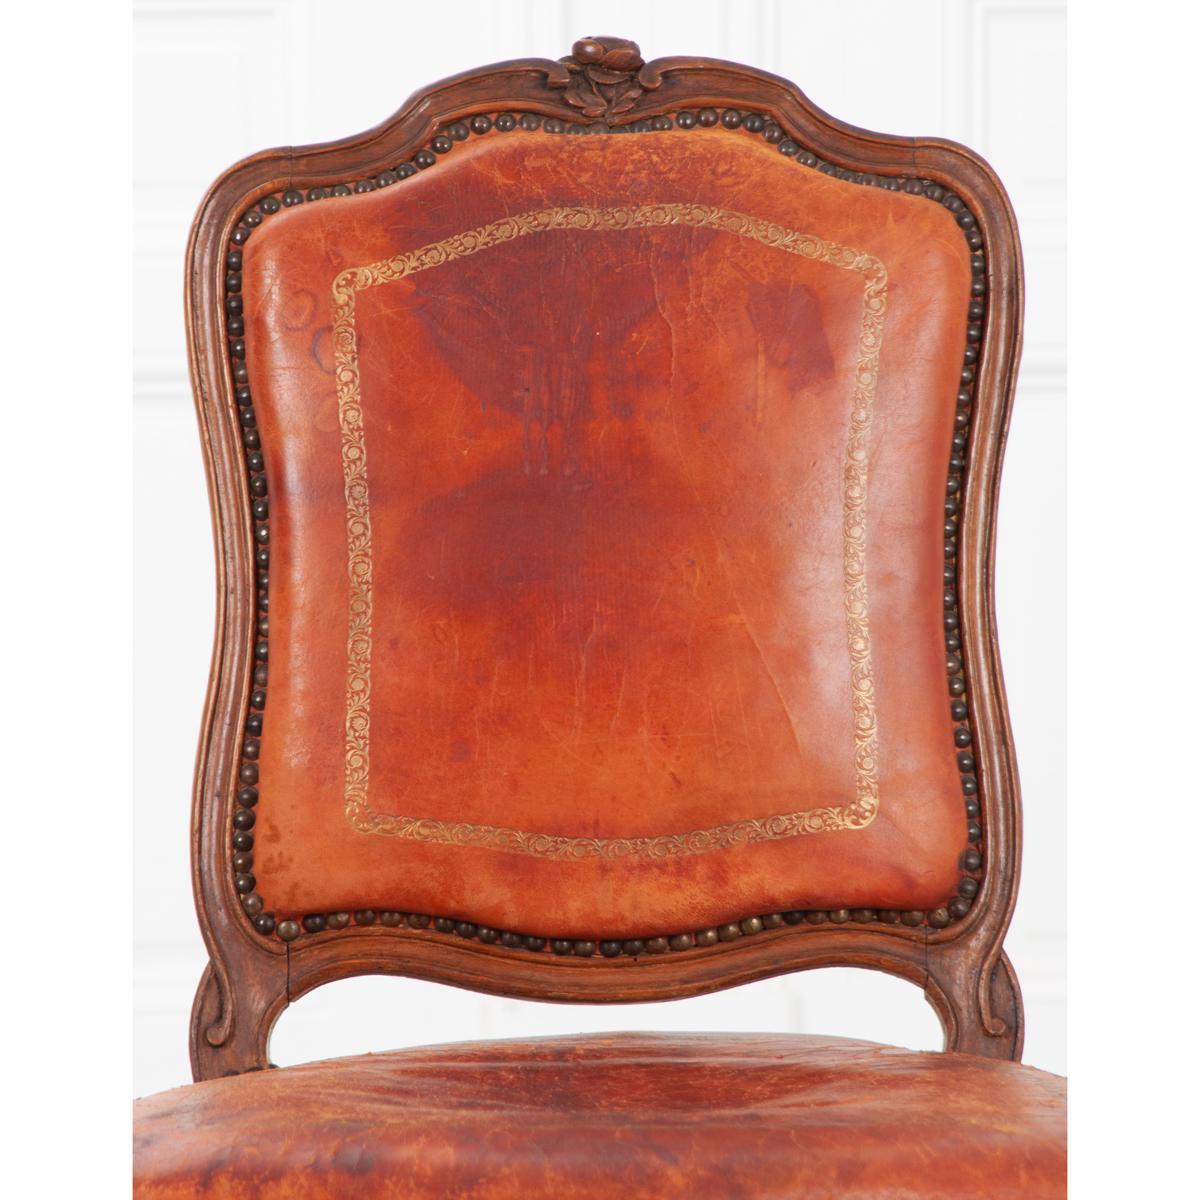 A stunning Louis XV style chair, upholstered in a heavily-worn antique leather. The shapely chair has a walnut frame that has patinated over time, acquiring an amazing antique finish. It has a rose carved into the frame at the top of the backrest